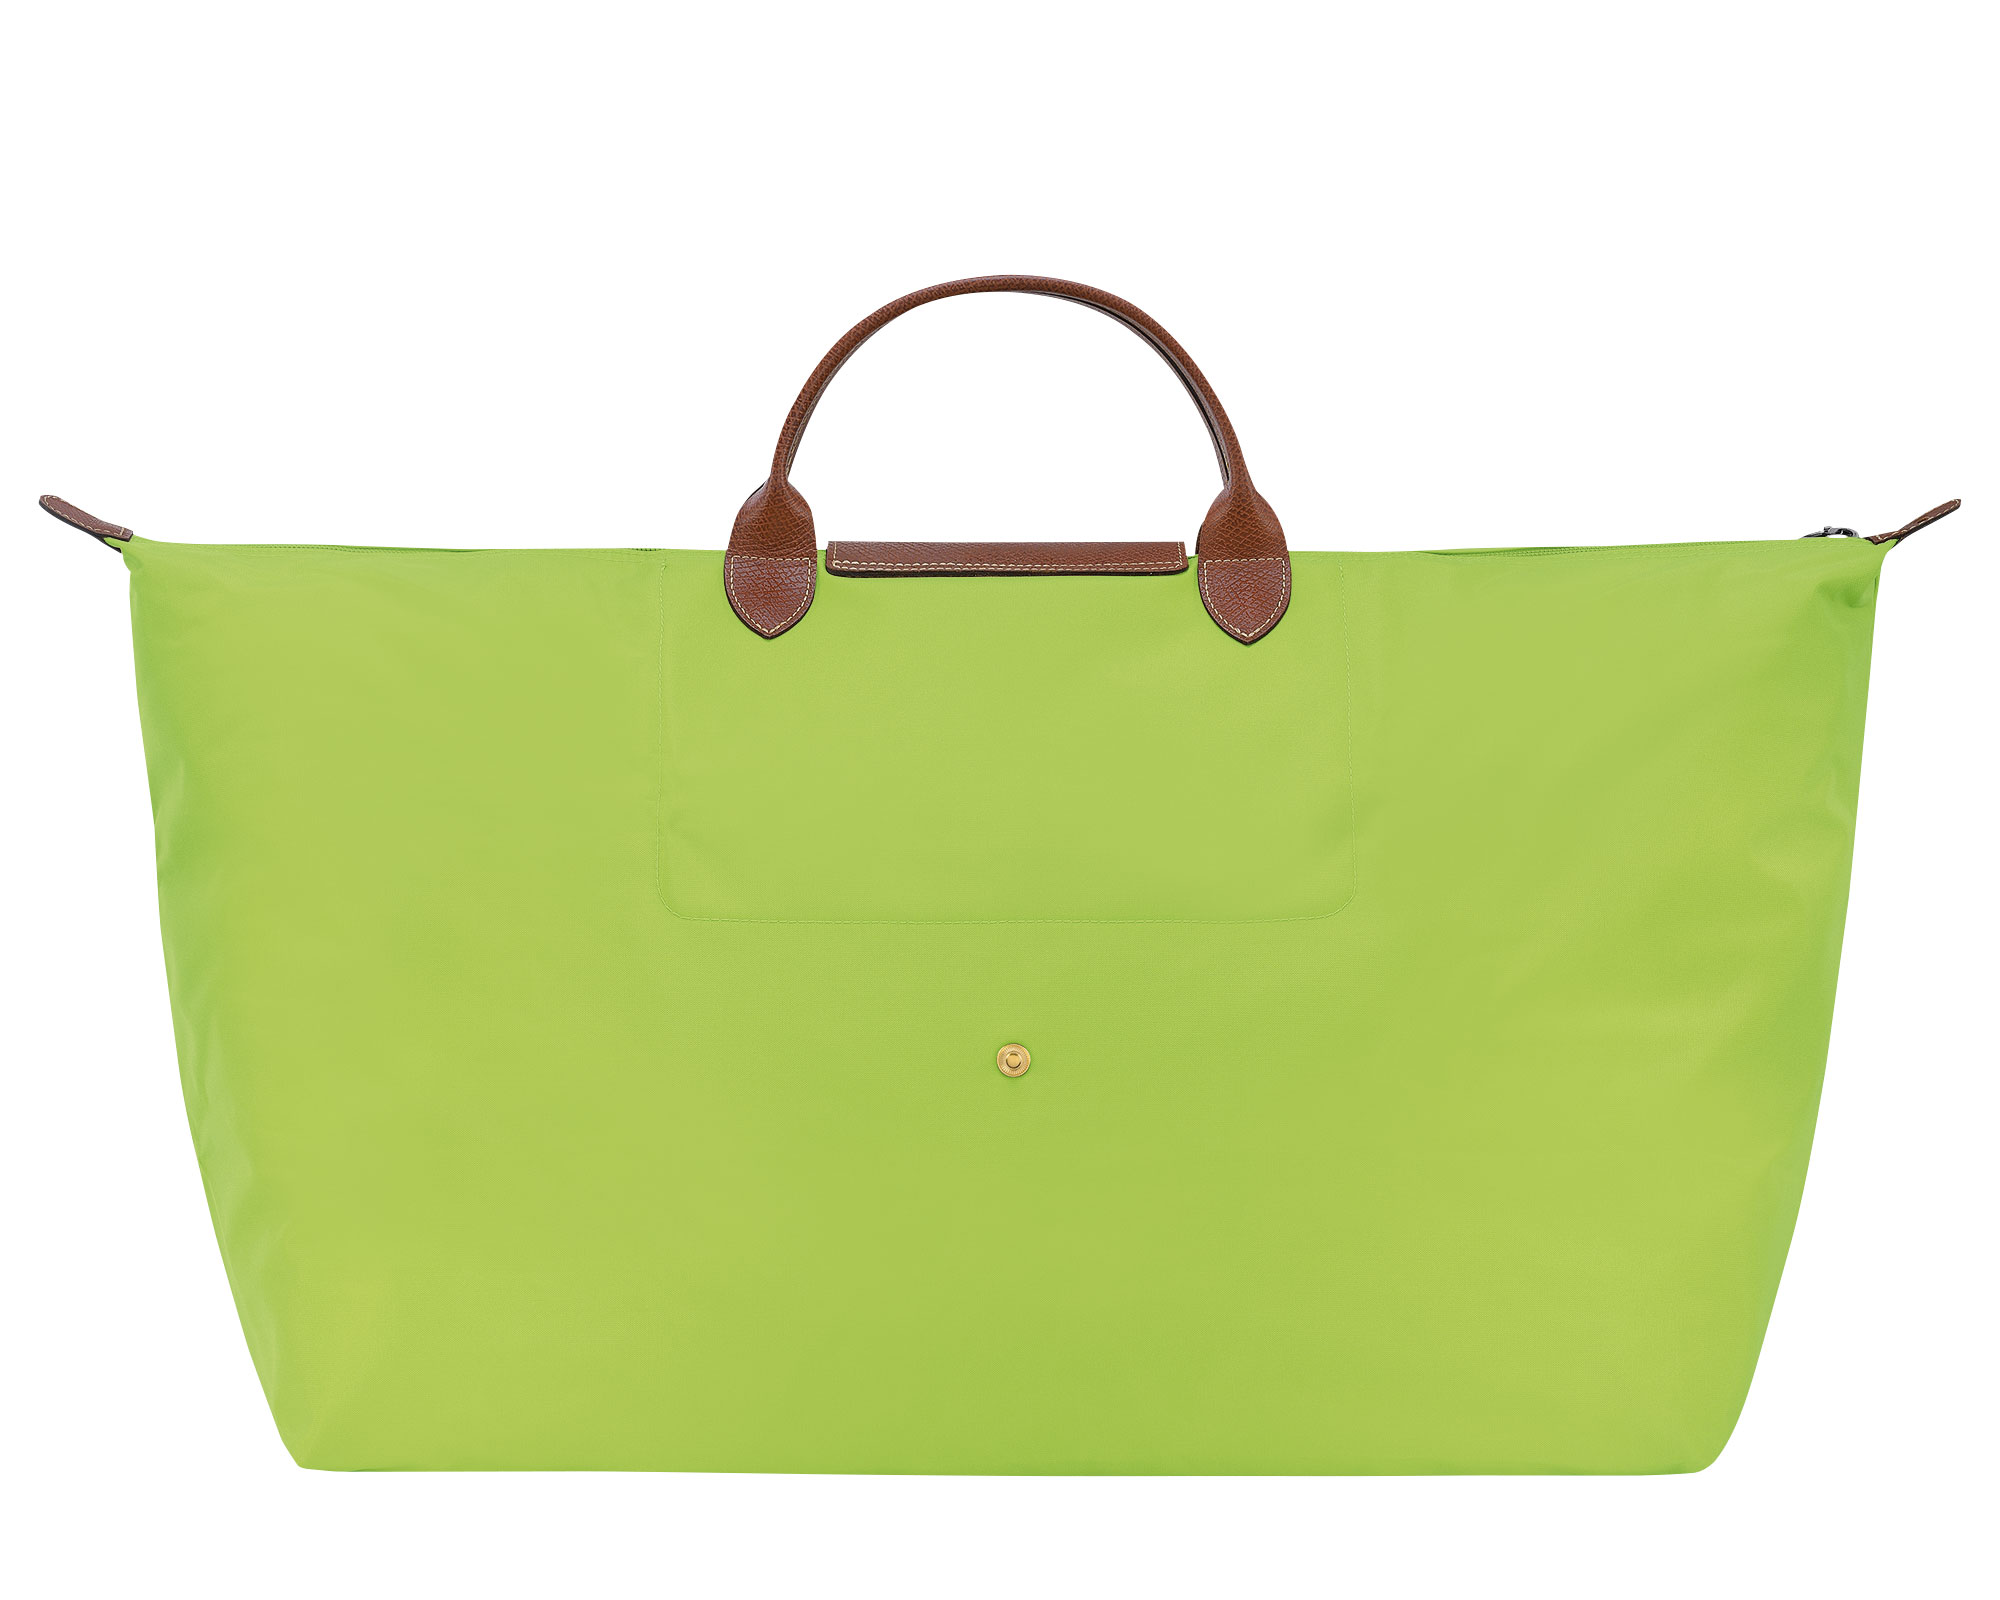 Urban Ladies - The Longchamp Le Pliage Filet bag from the